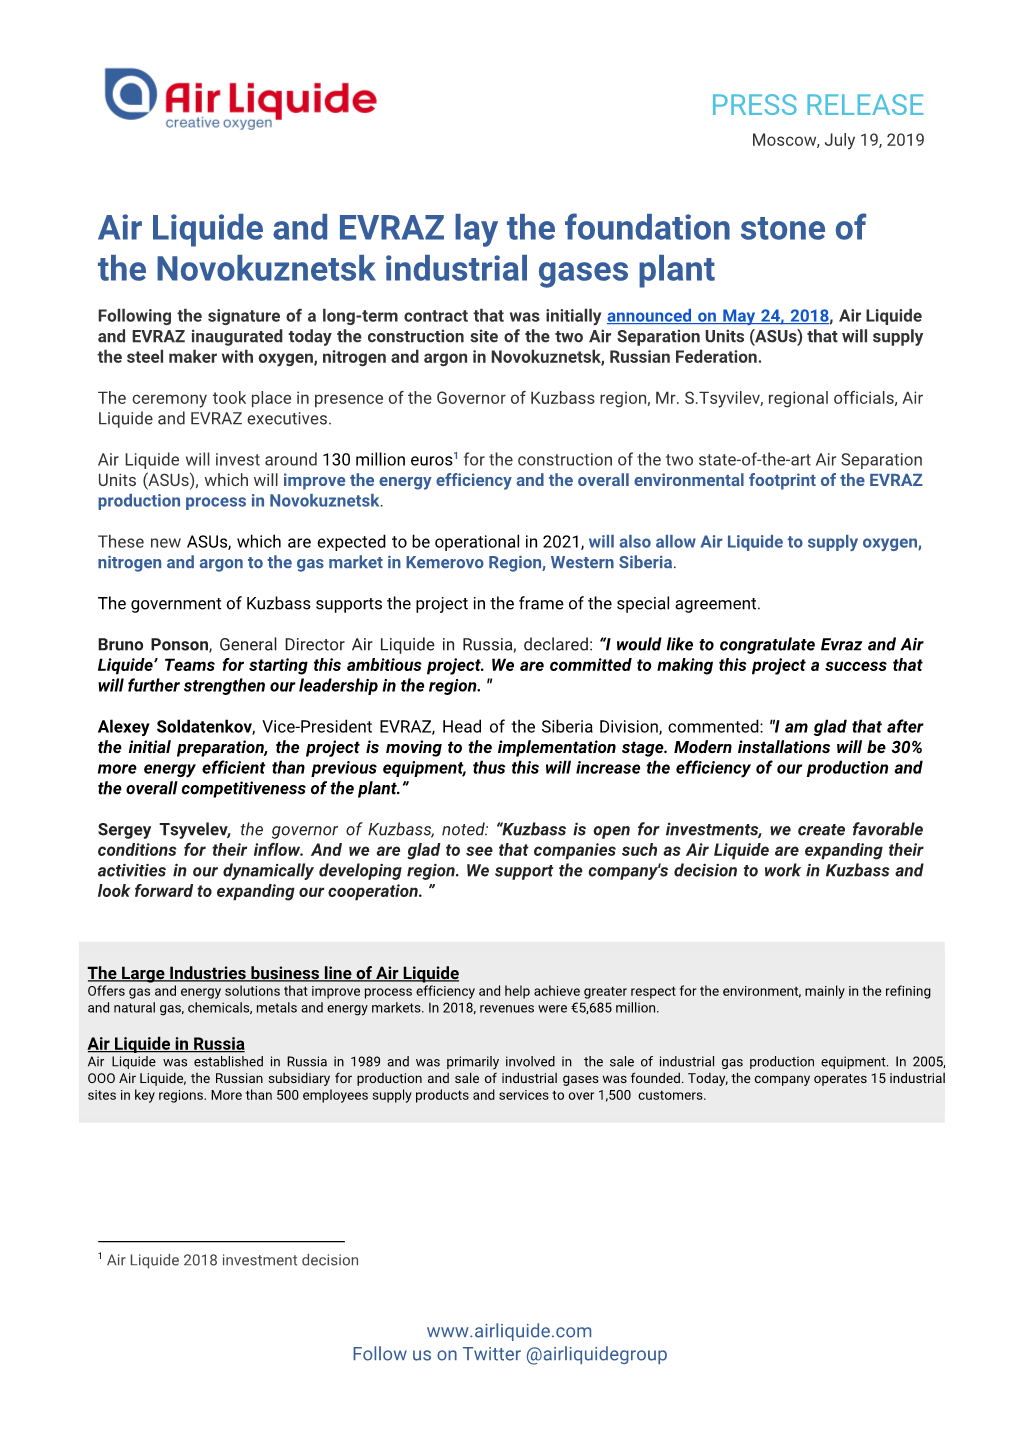 Air Liquide and EVRAZ Lay the Foundation Stone of the Novokuznetsk Industrial Gases Plant